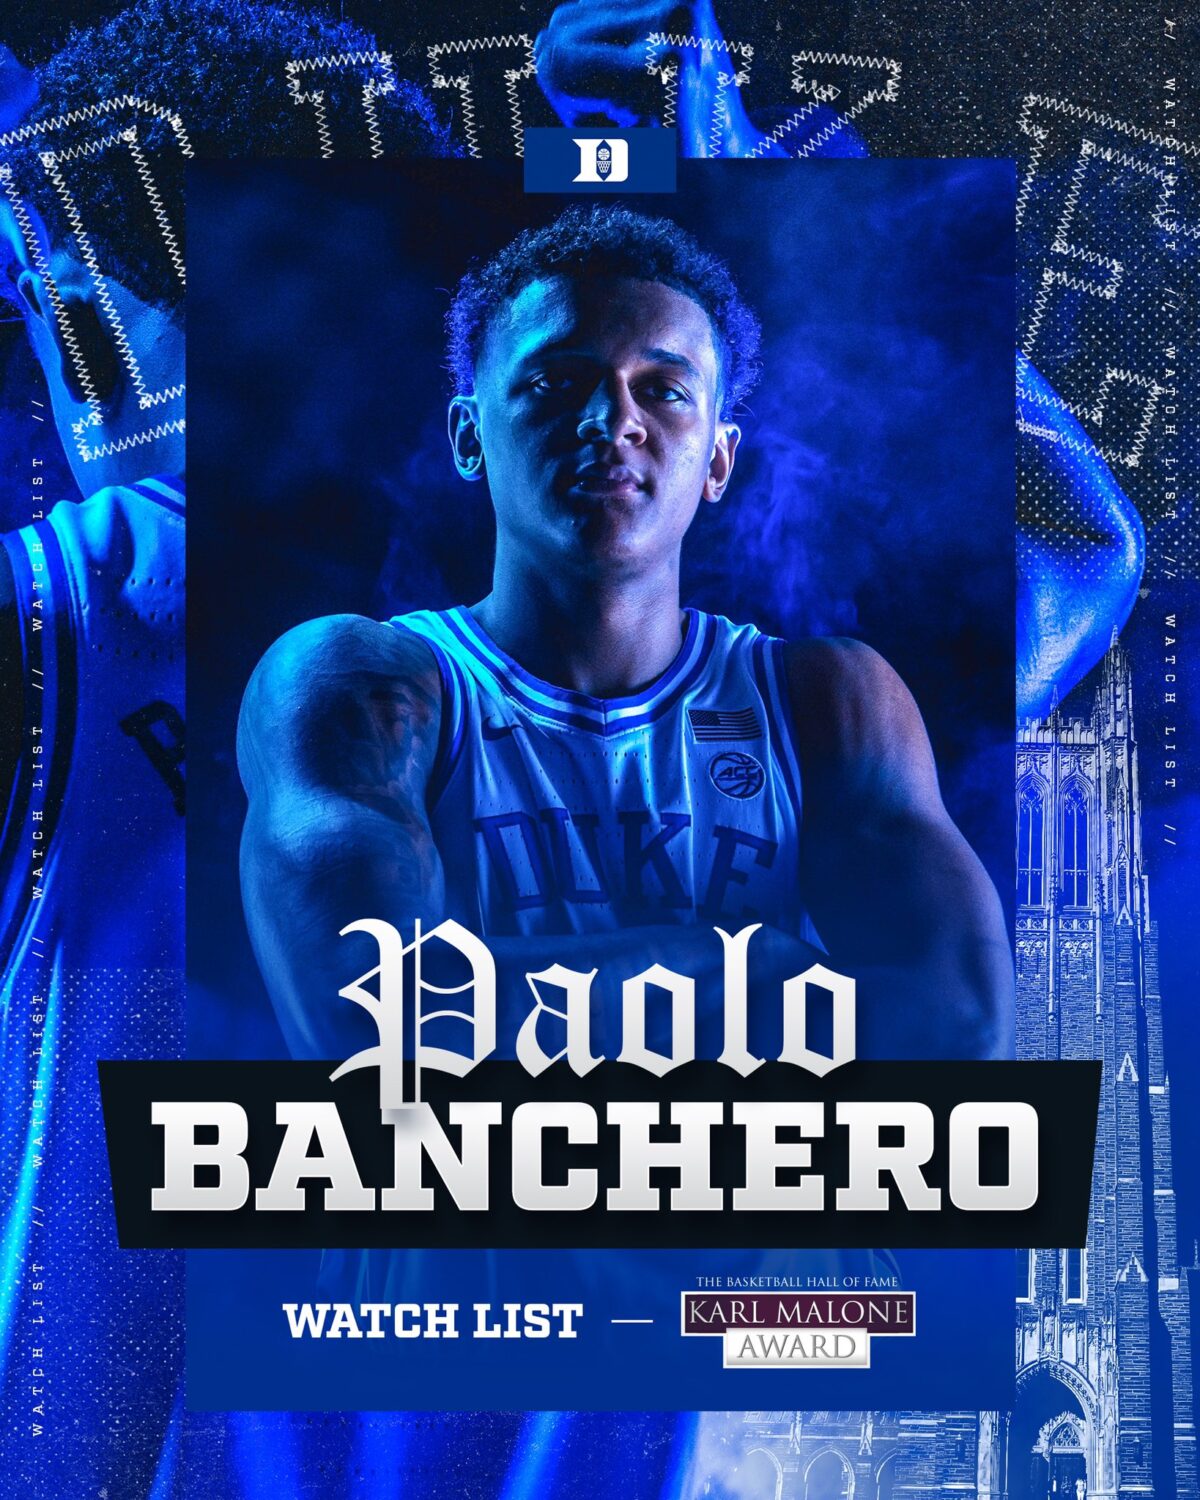 Paolo Banchero Poster  Highlights and Live Video from Bleacher Report